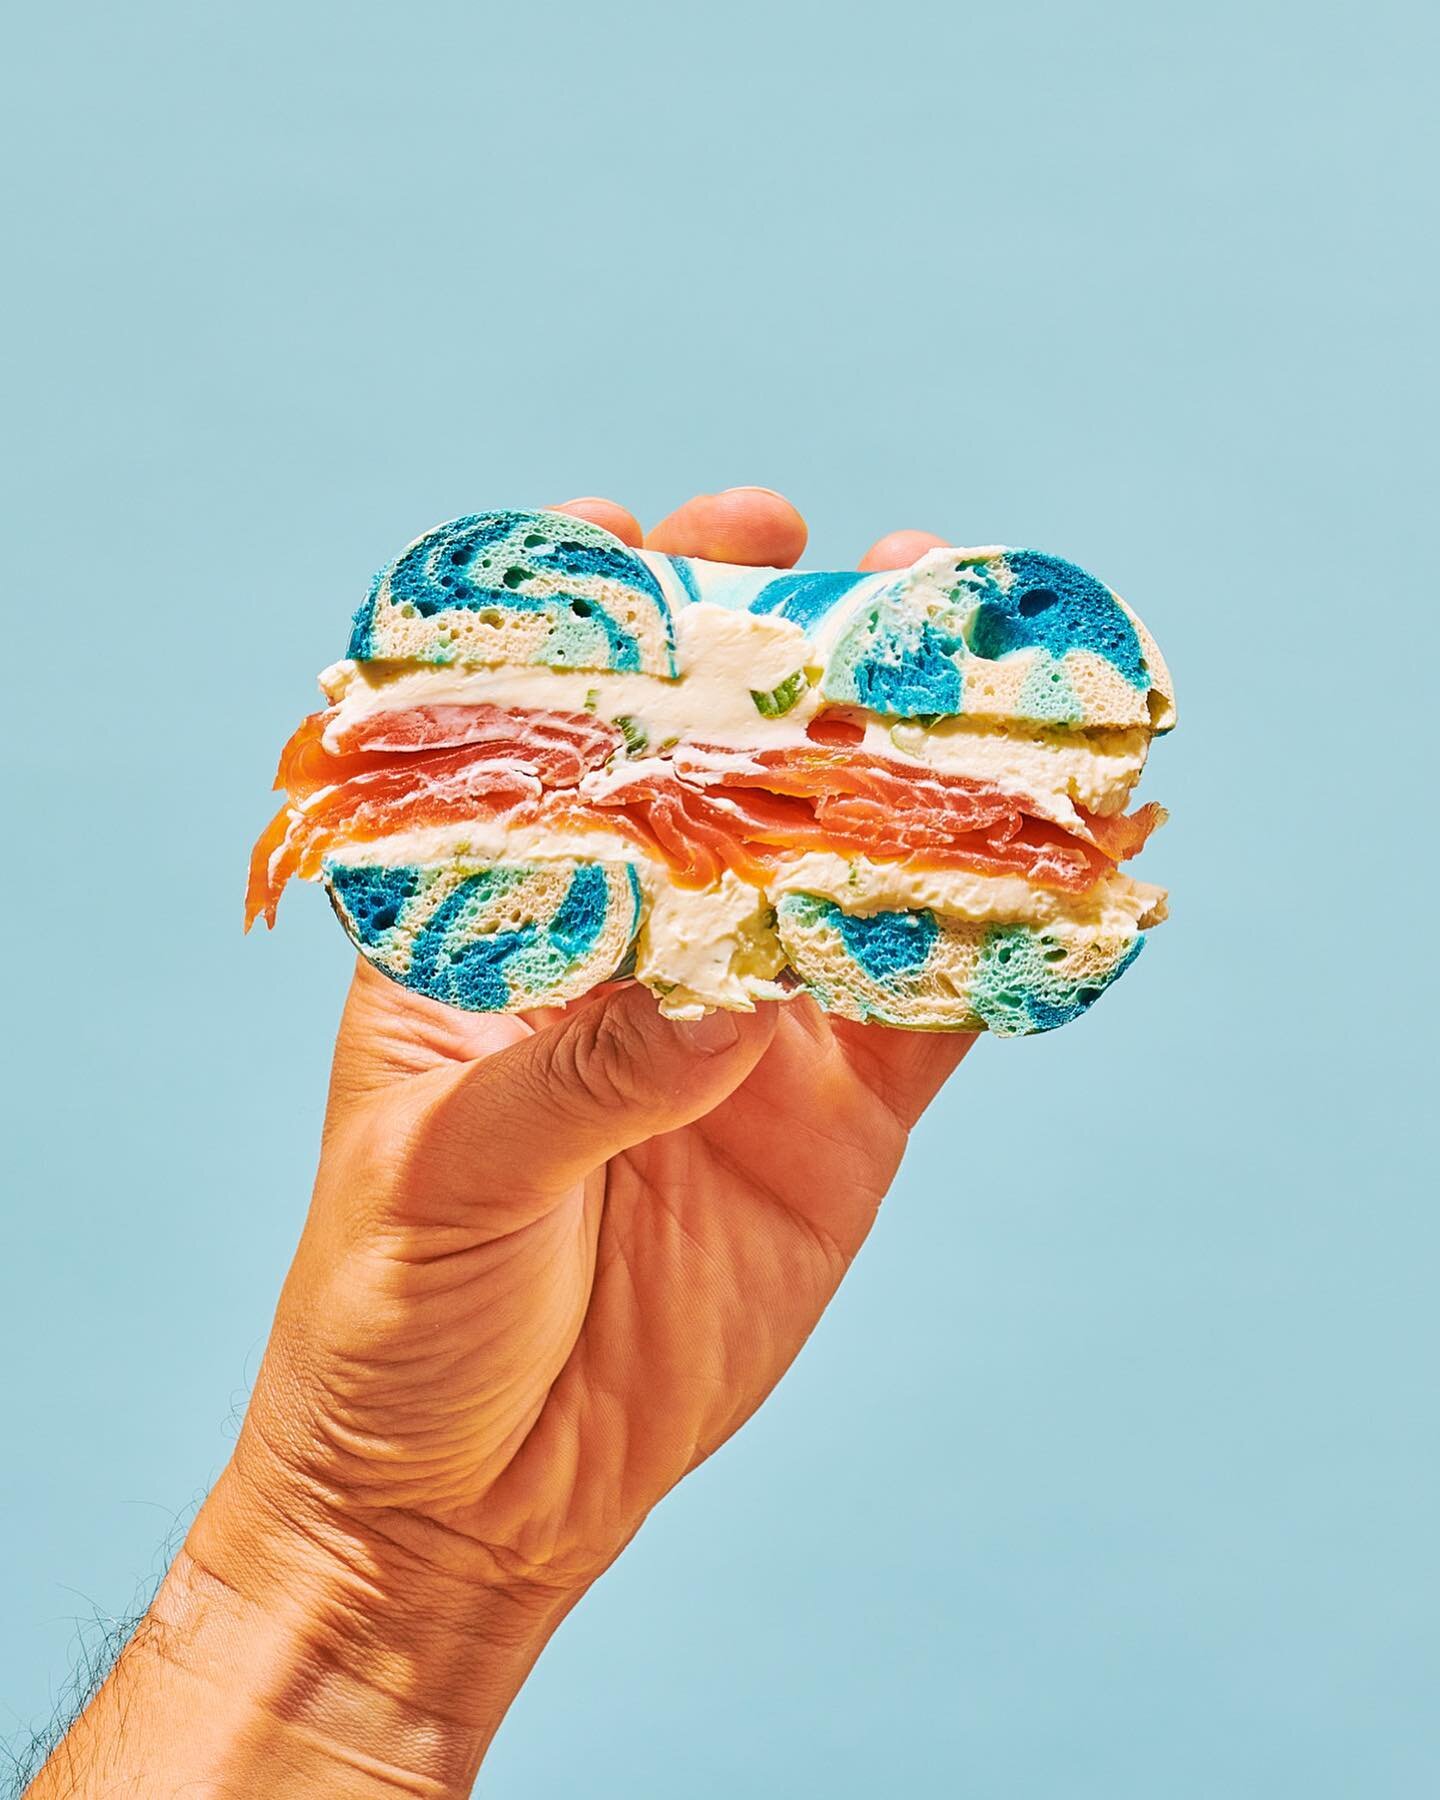 @bazbagel honestly changed my fuddy duddy mind about colored bagels, i mean if you&rsquo;re going to eat a plain bagel why shouldn&rsquo;t it be blue 💙